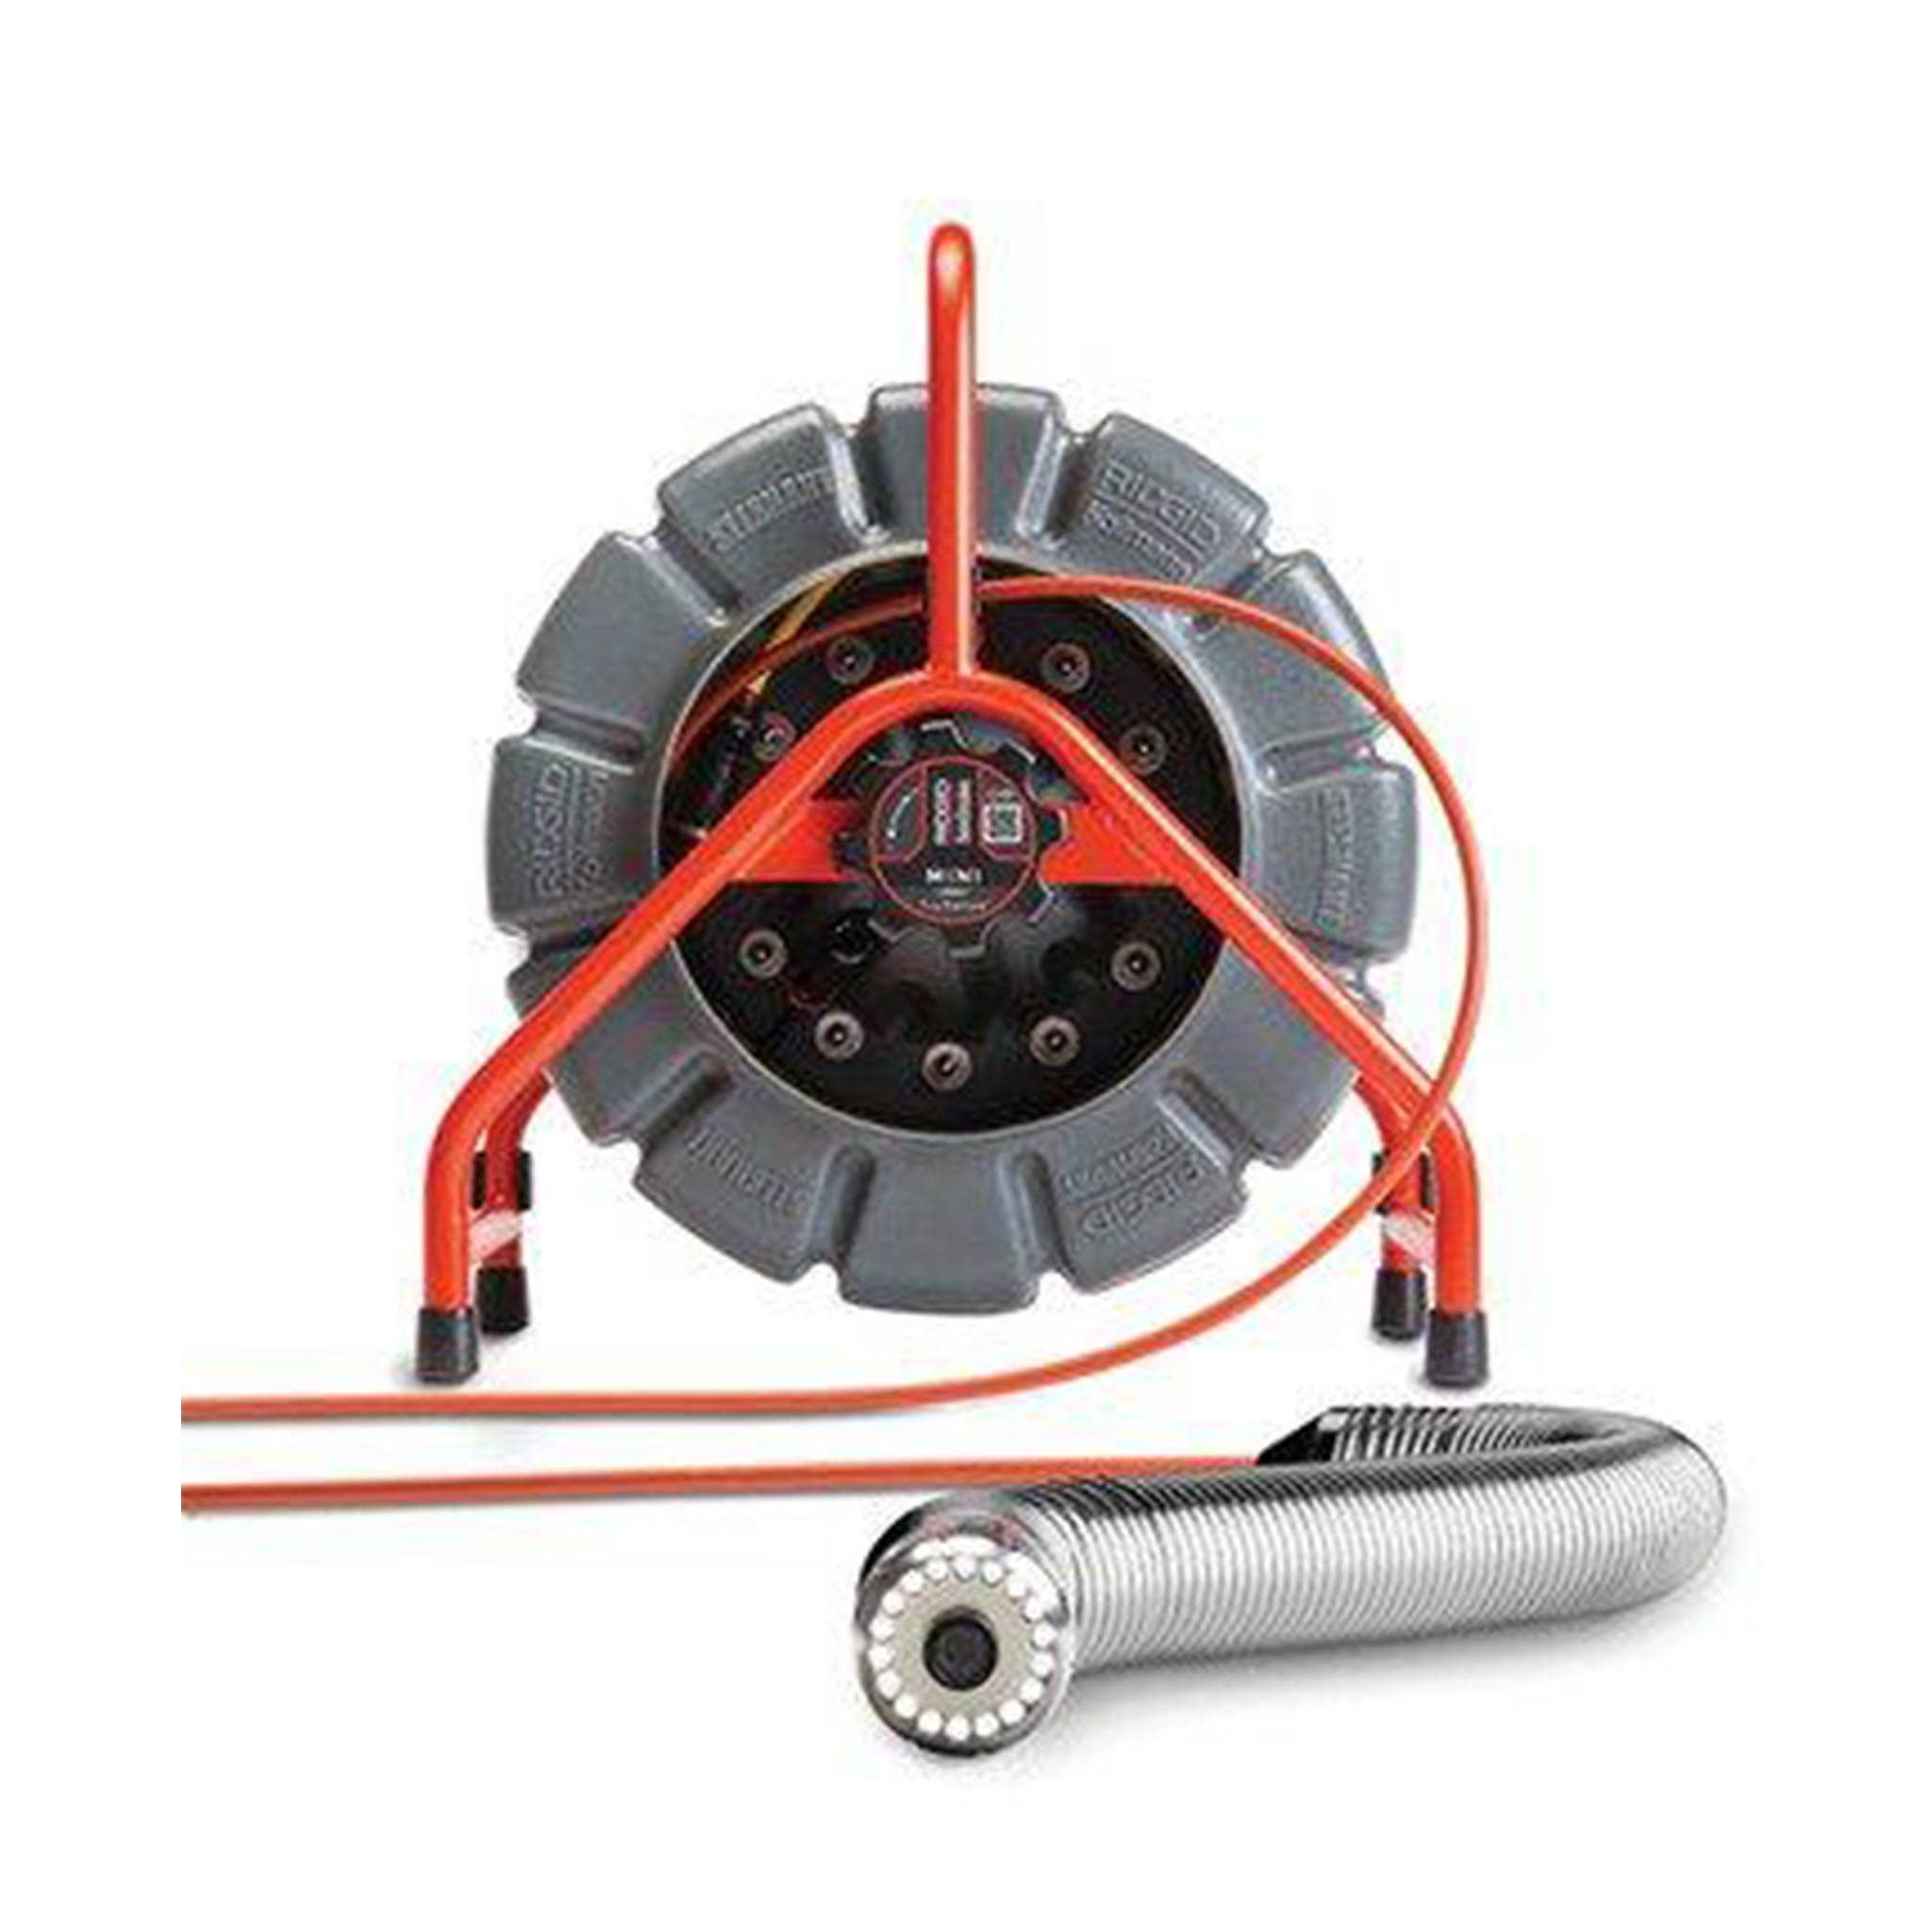 RIDGID Introduces Digital Self-Leveling Reel with Its SeeSnake